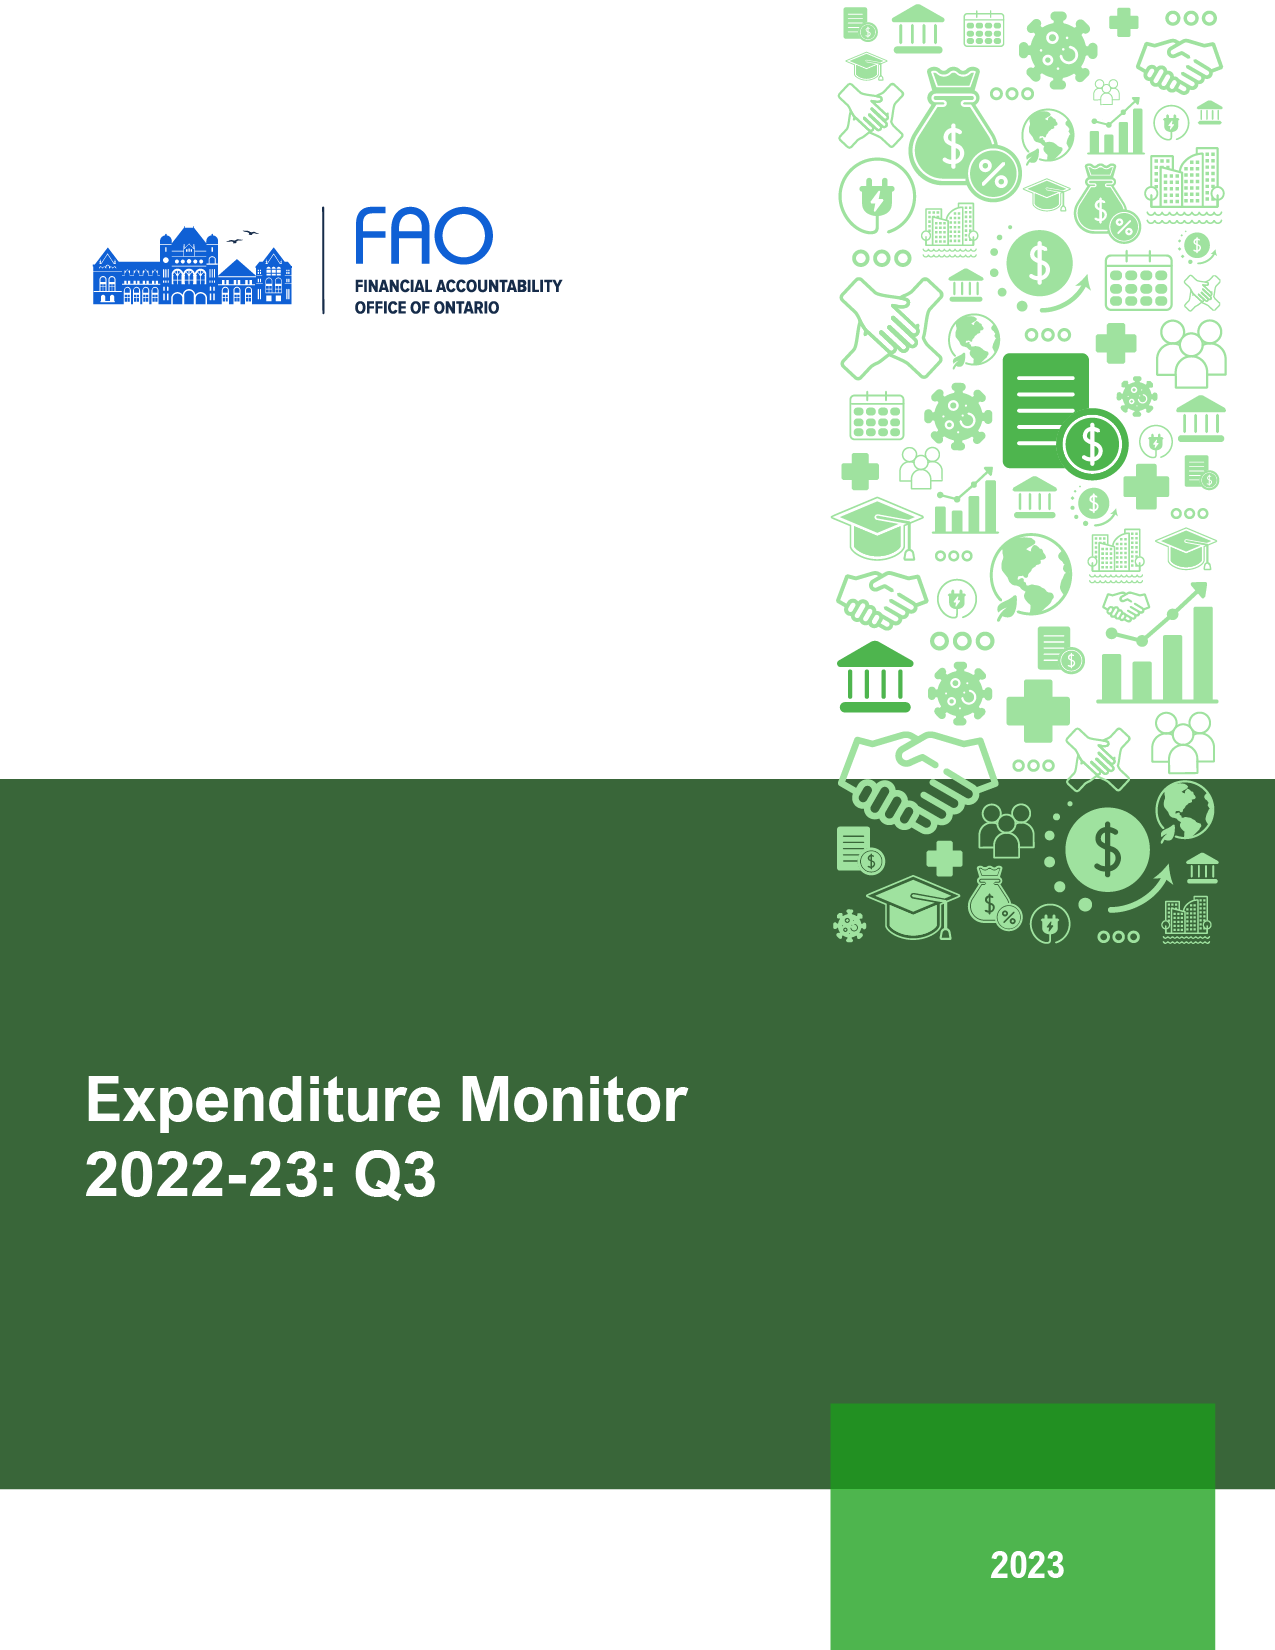 Expenditure Monitor 2022-23: Q3 report cover